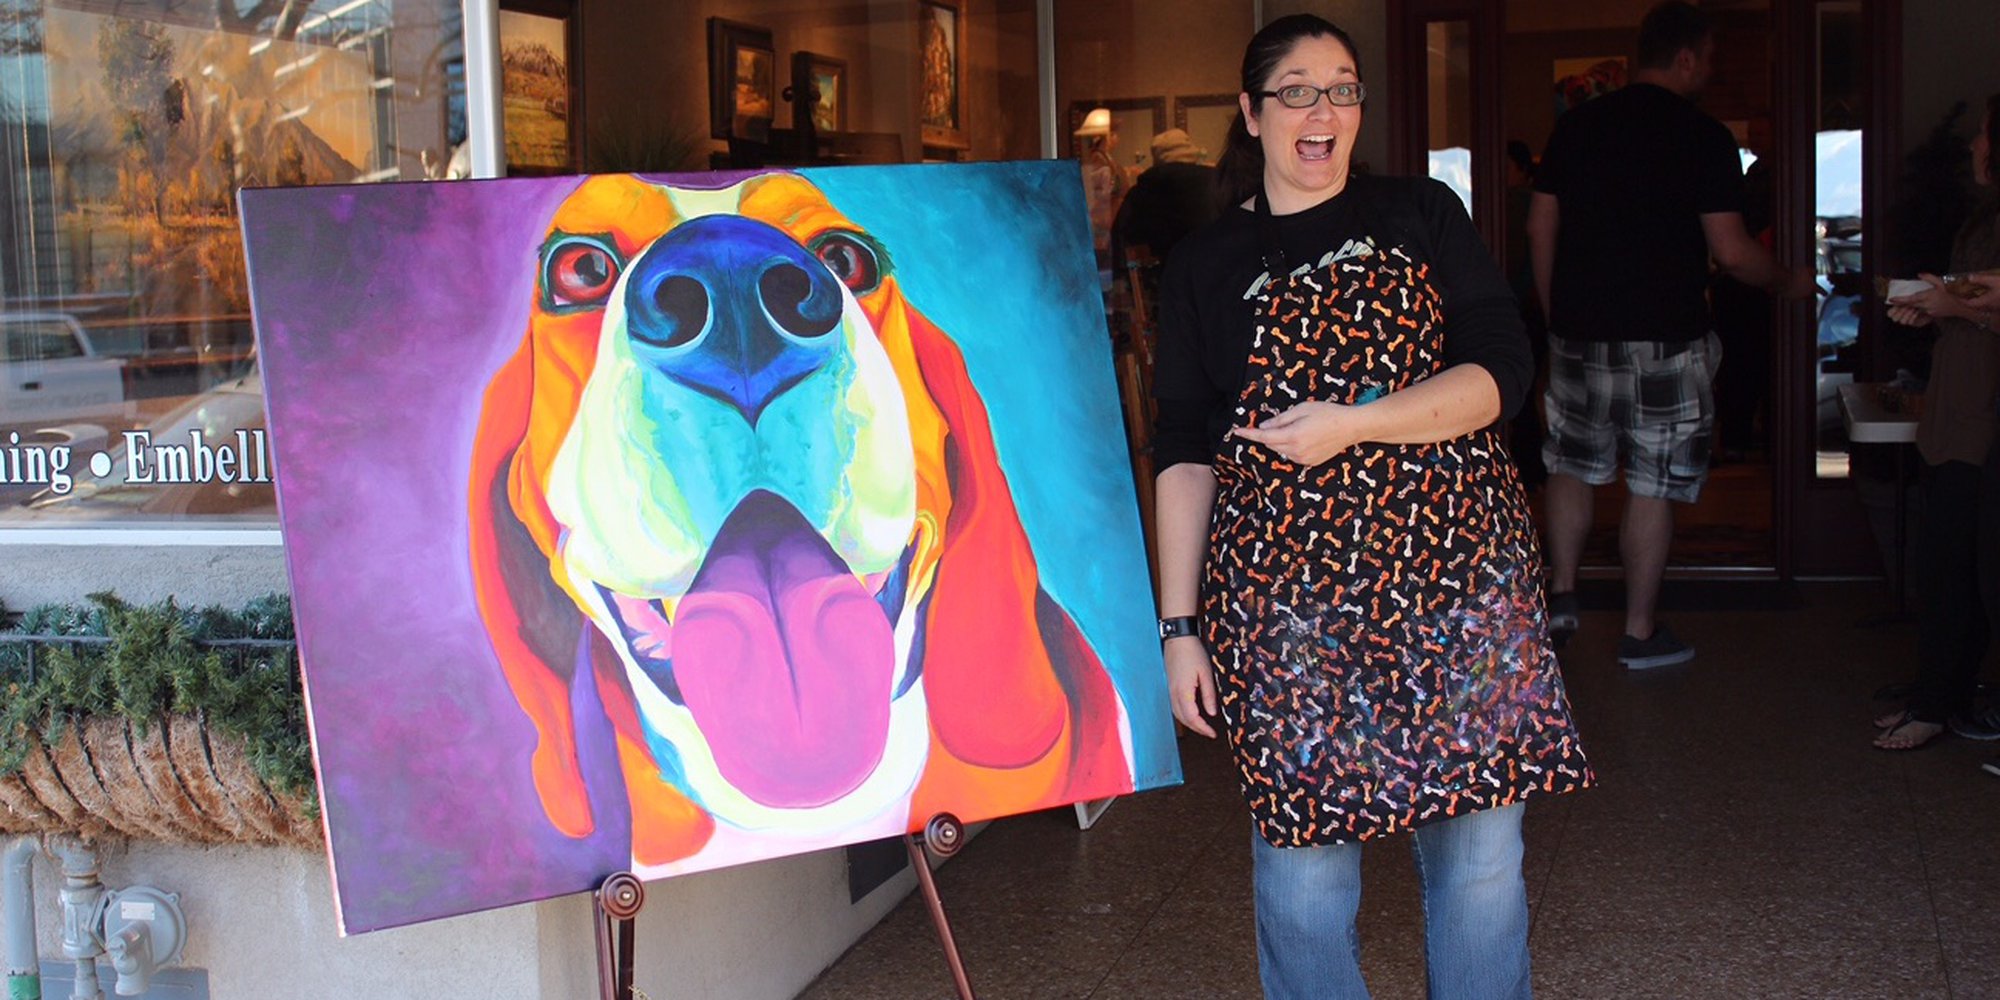 Fooled You! George W. Bush didn't join Artfinder, but pet portrait artist, Alicia VanNoy Call did